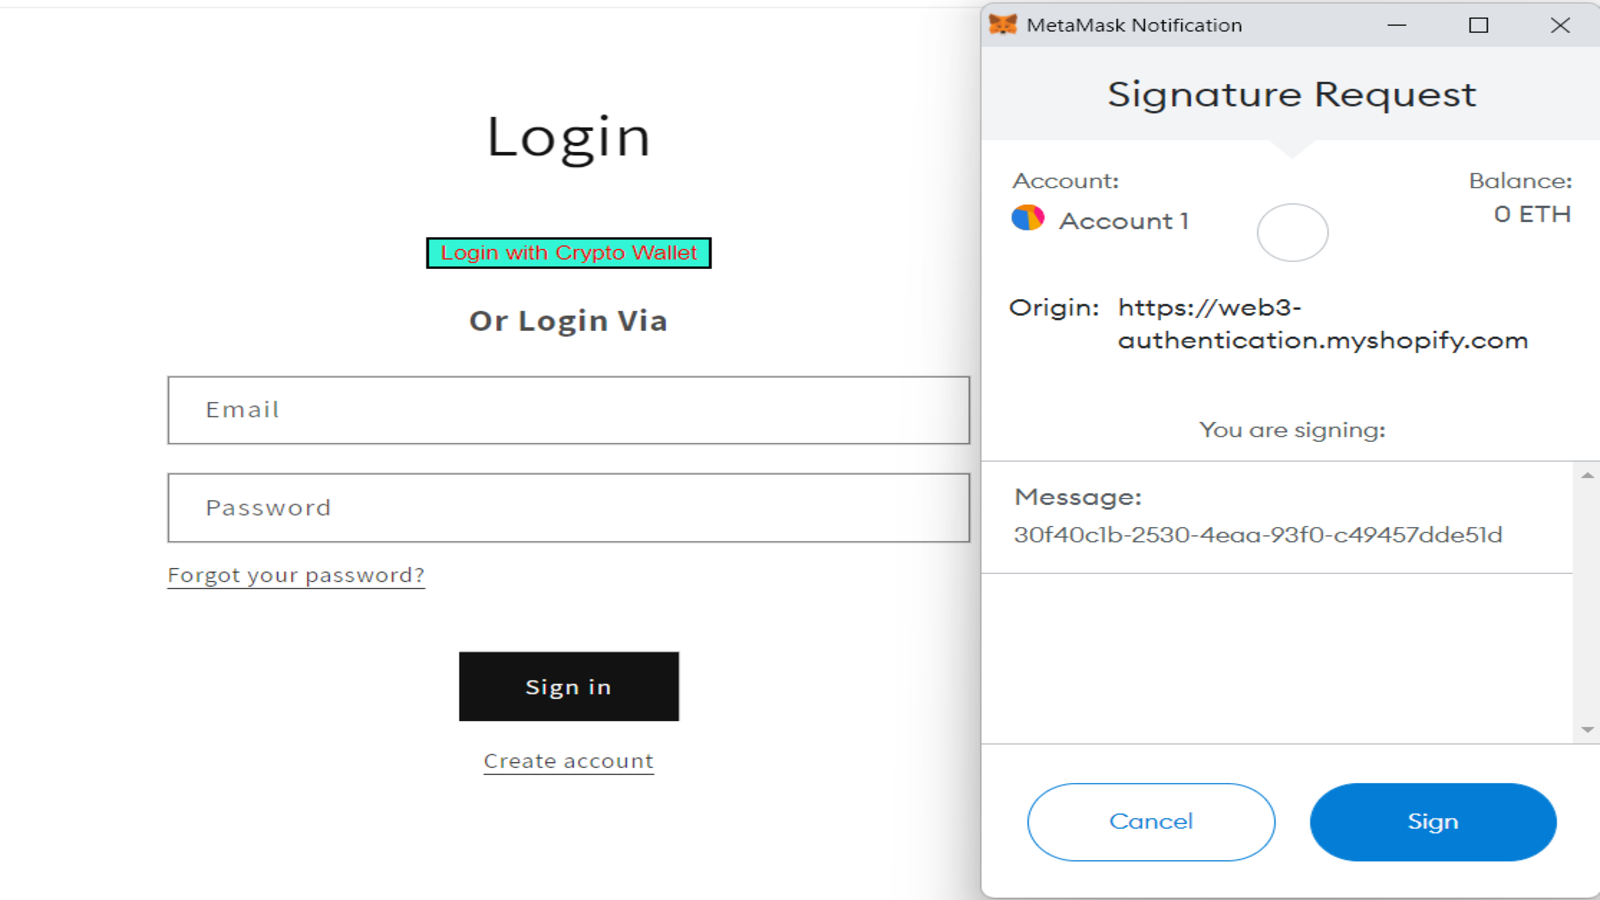 Login with Crypto Wallet by Validating Signature